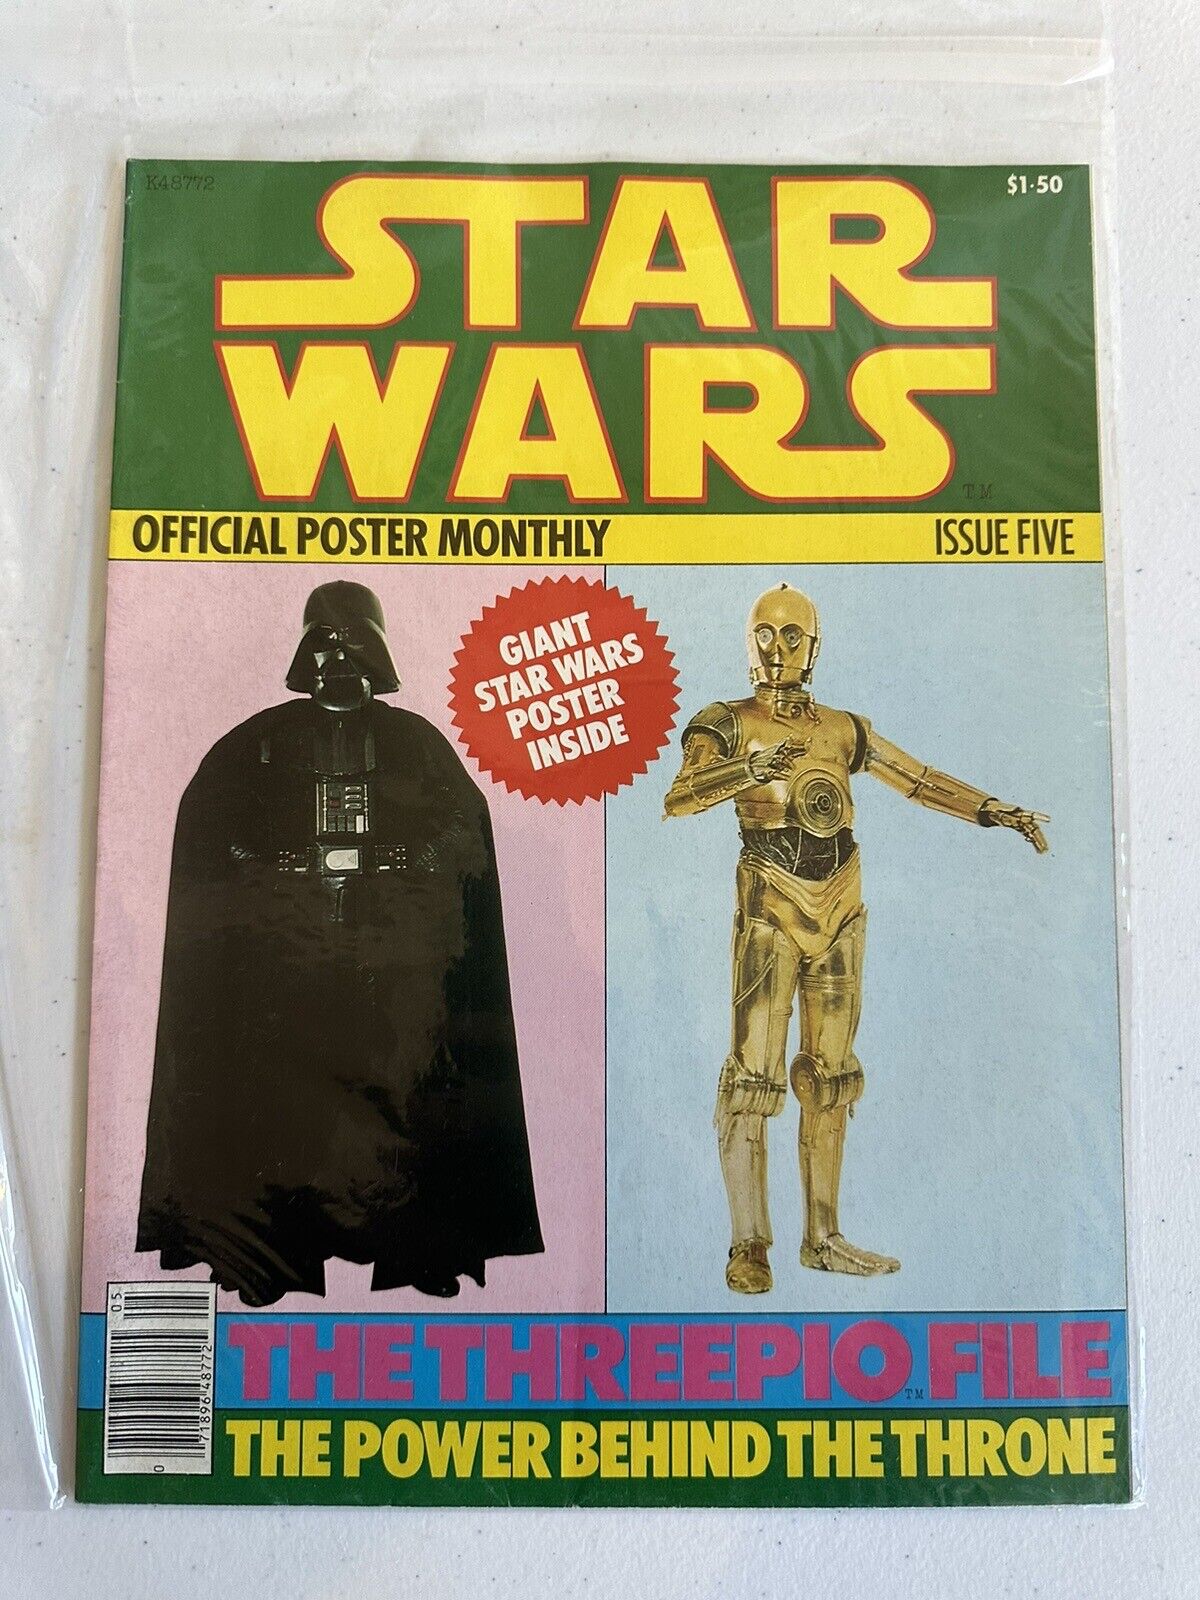 1977 Star Wars Official Poster Monthly Issue 5 (Five) - Minty And Excellent 